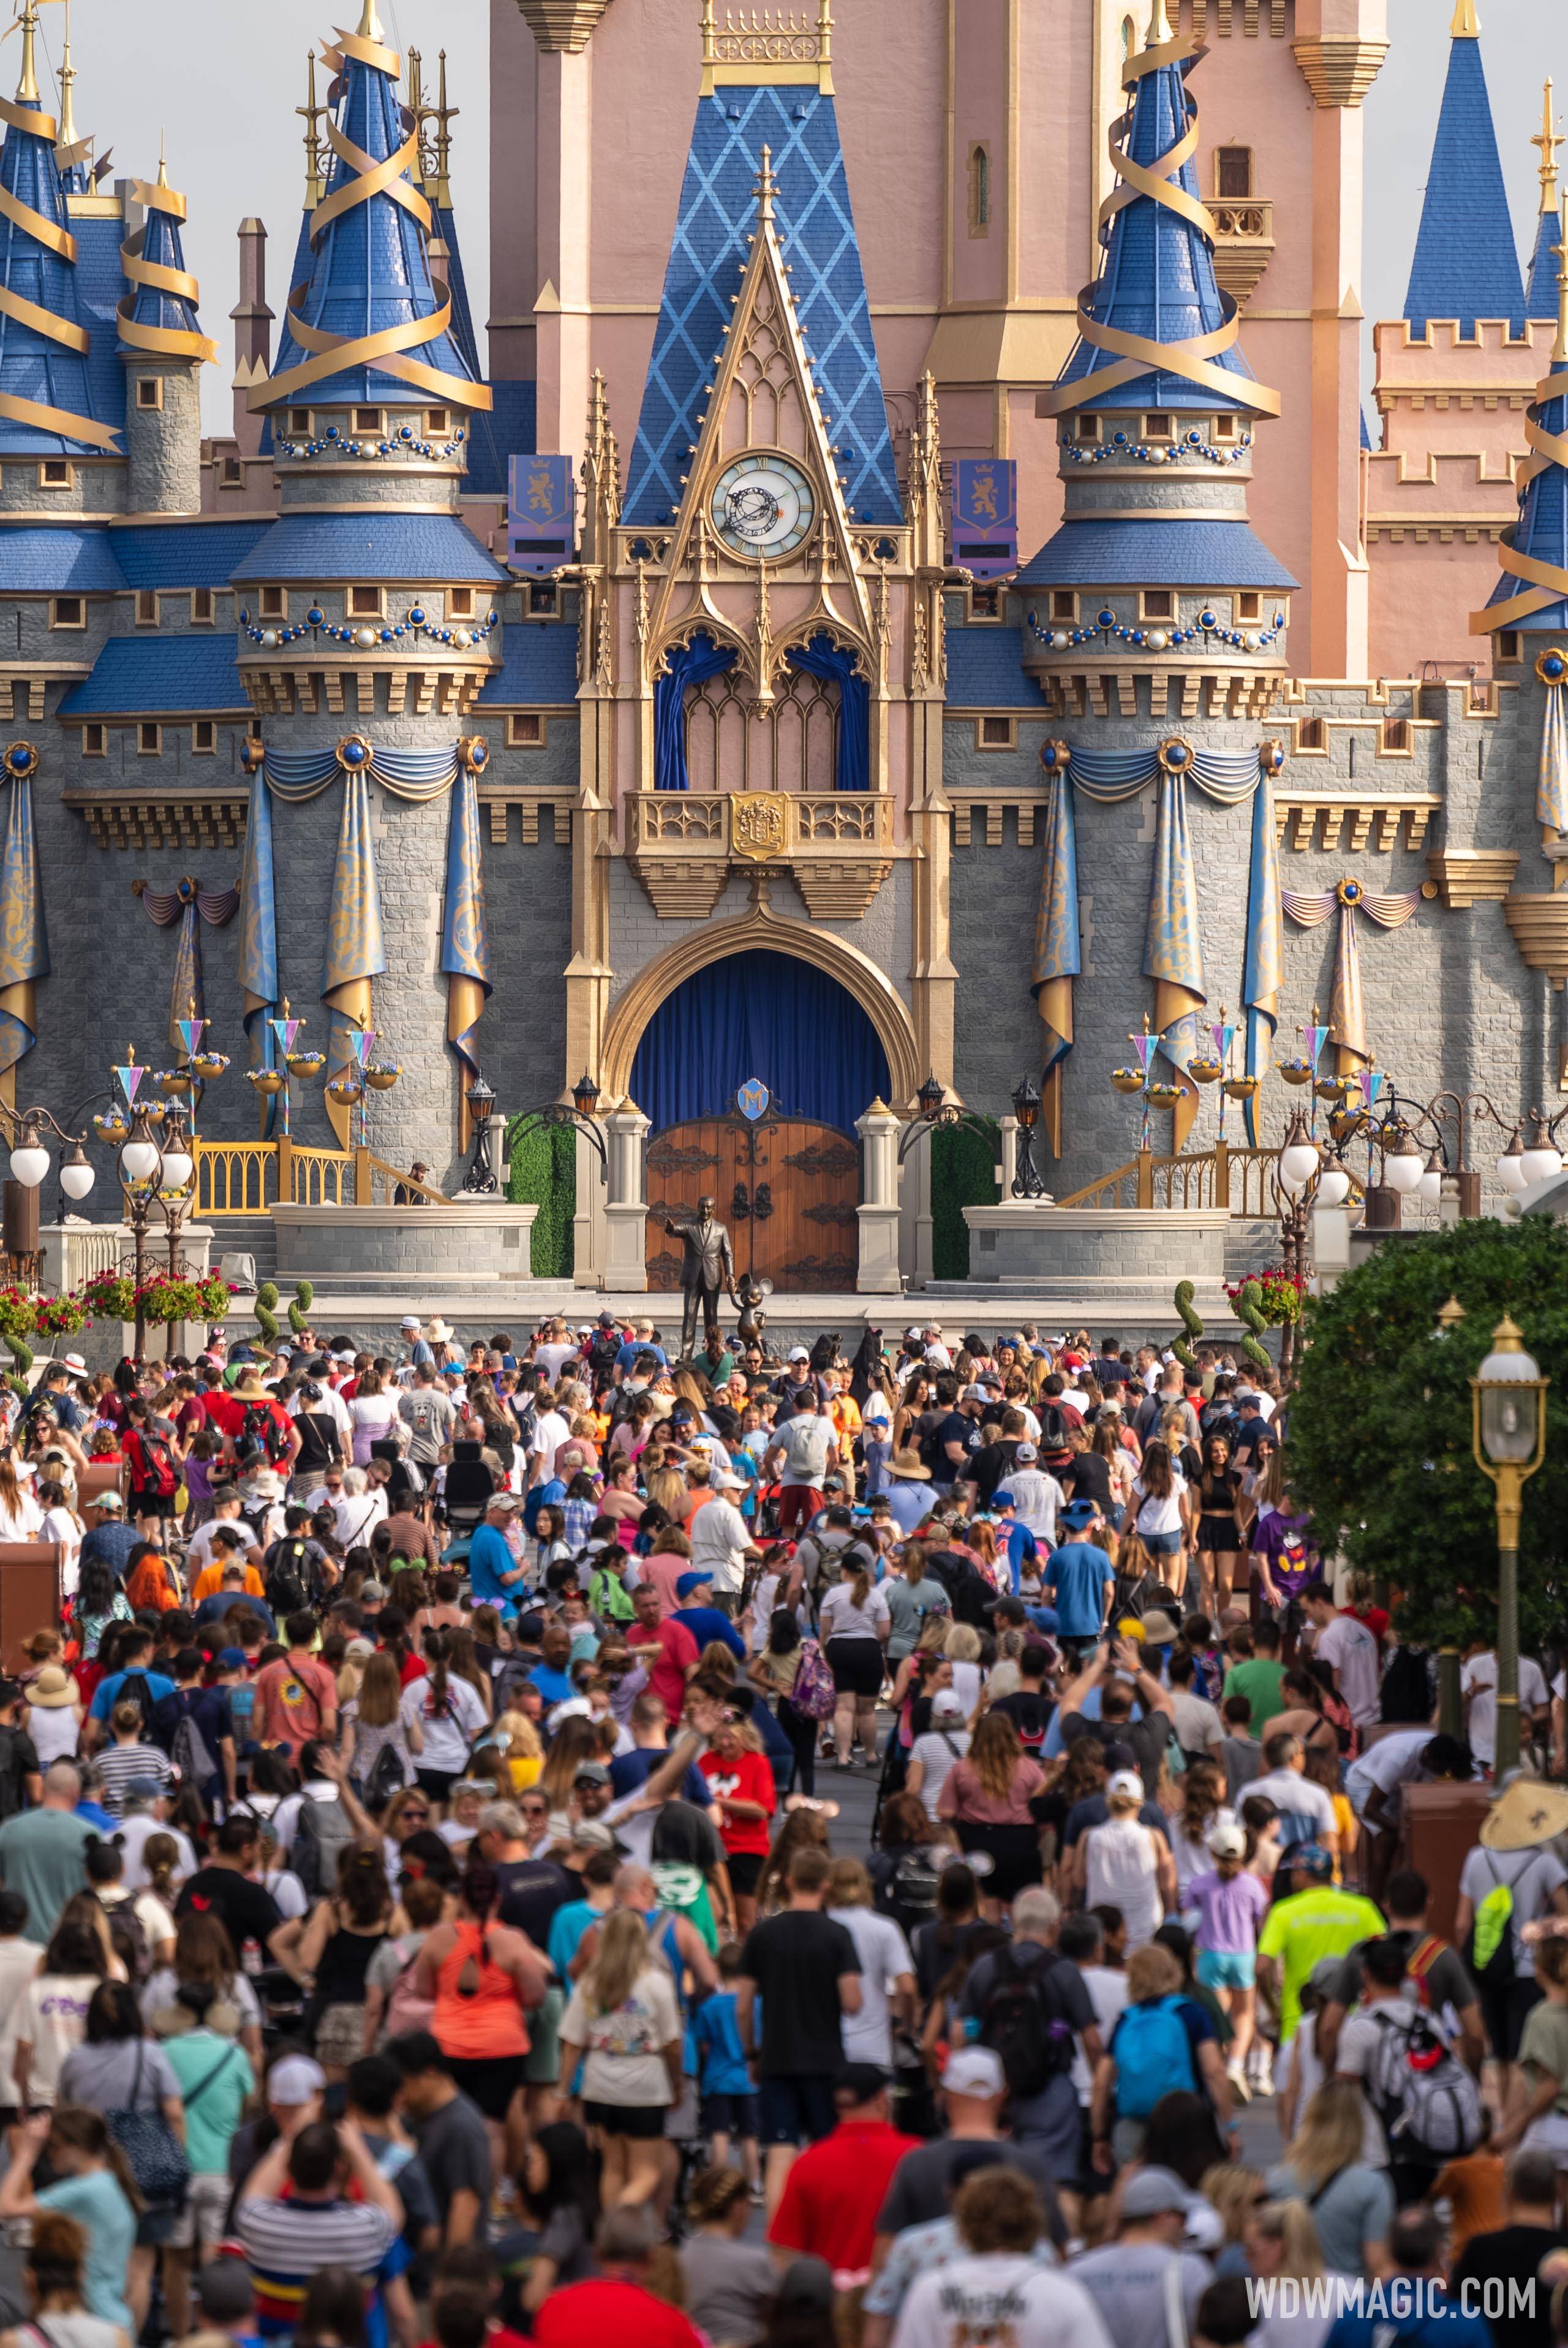 Iger said today that he is not concerned about attendance at Walt Disney World